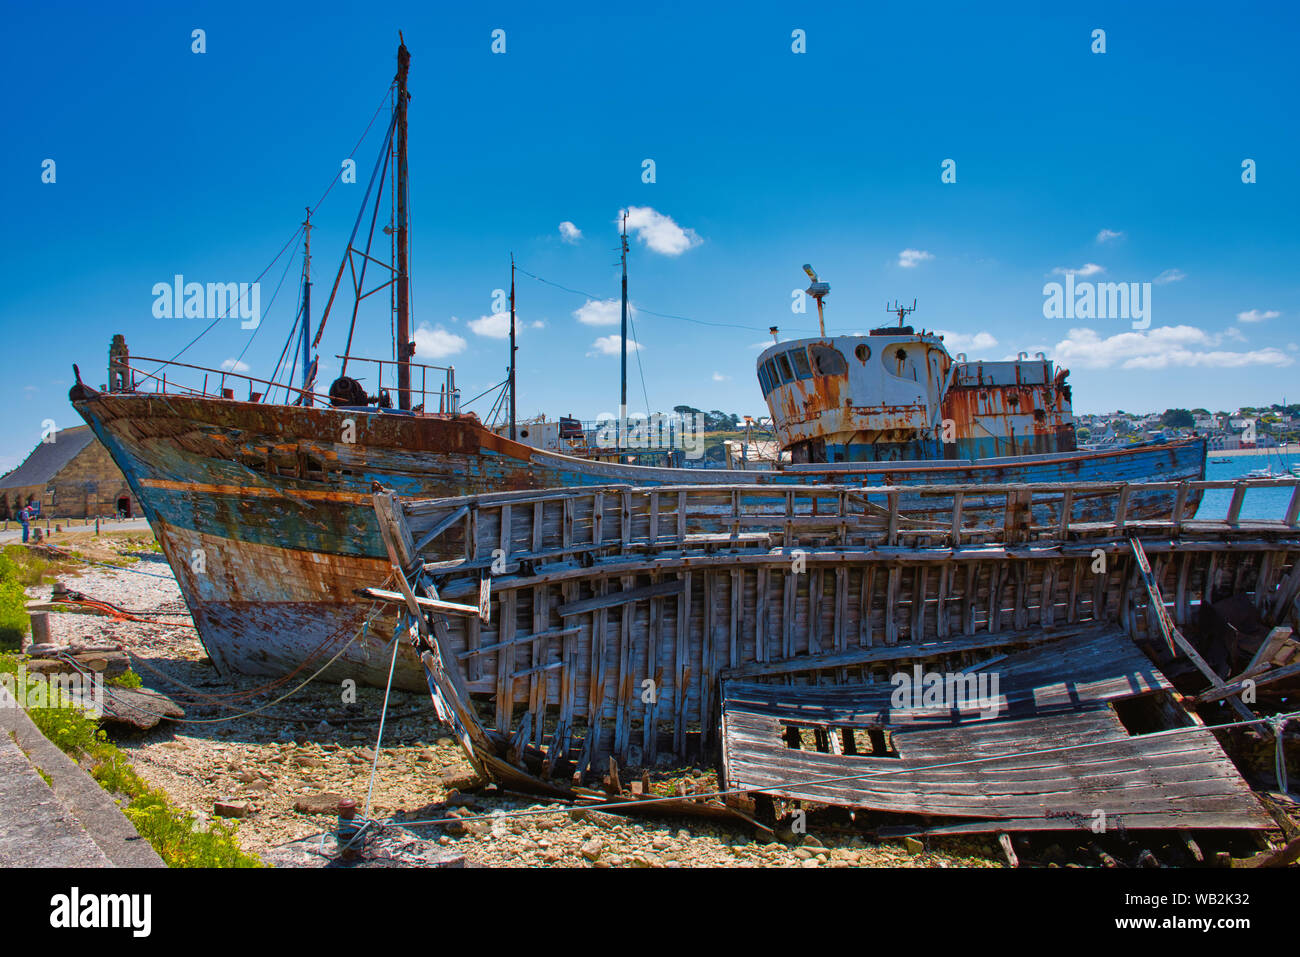 Old abandoned shipwrecks in the old boat cemetery of Camaret-sur-Mer in Brittany, France Stock Photo